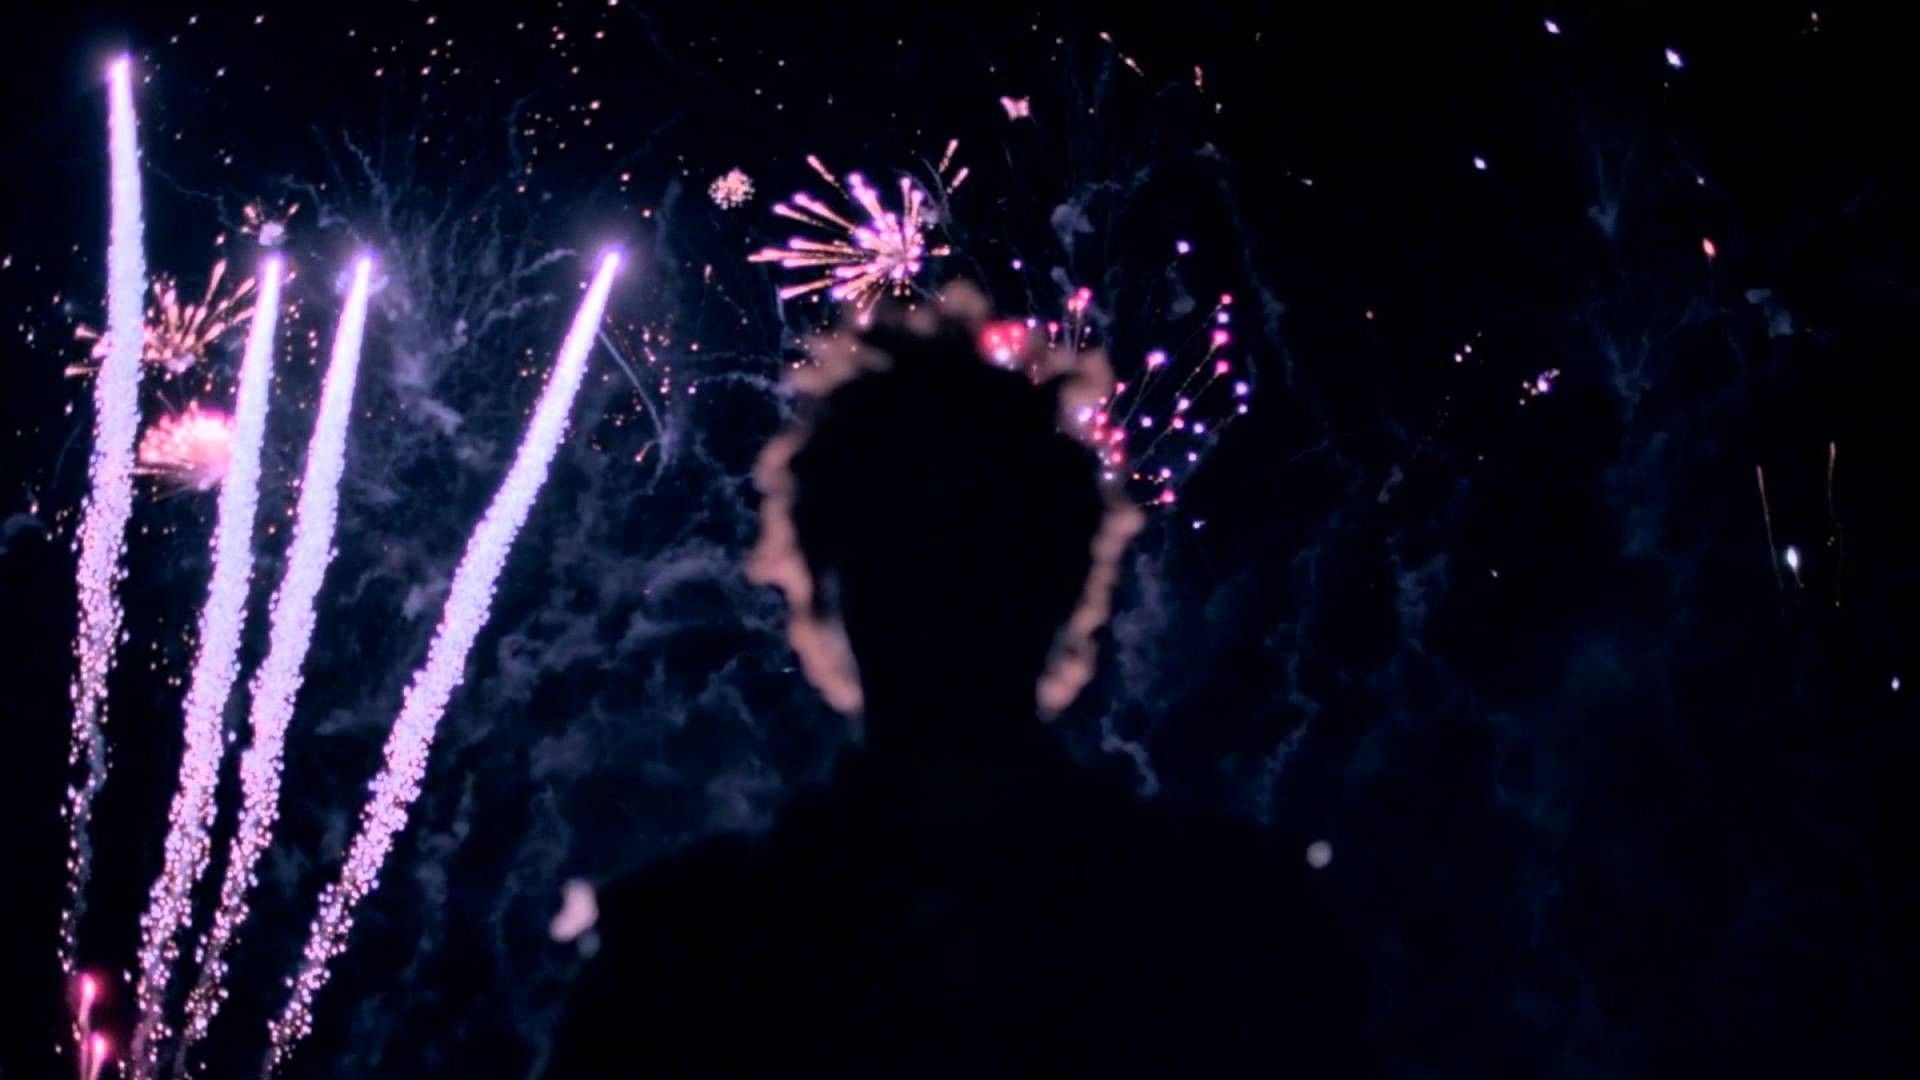 A crowd of people watch fireworks in the night sky - The Weeknd